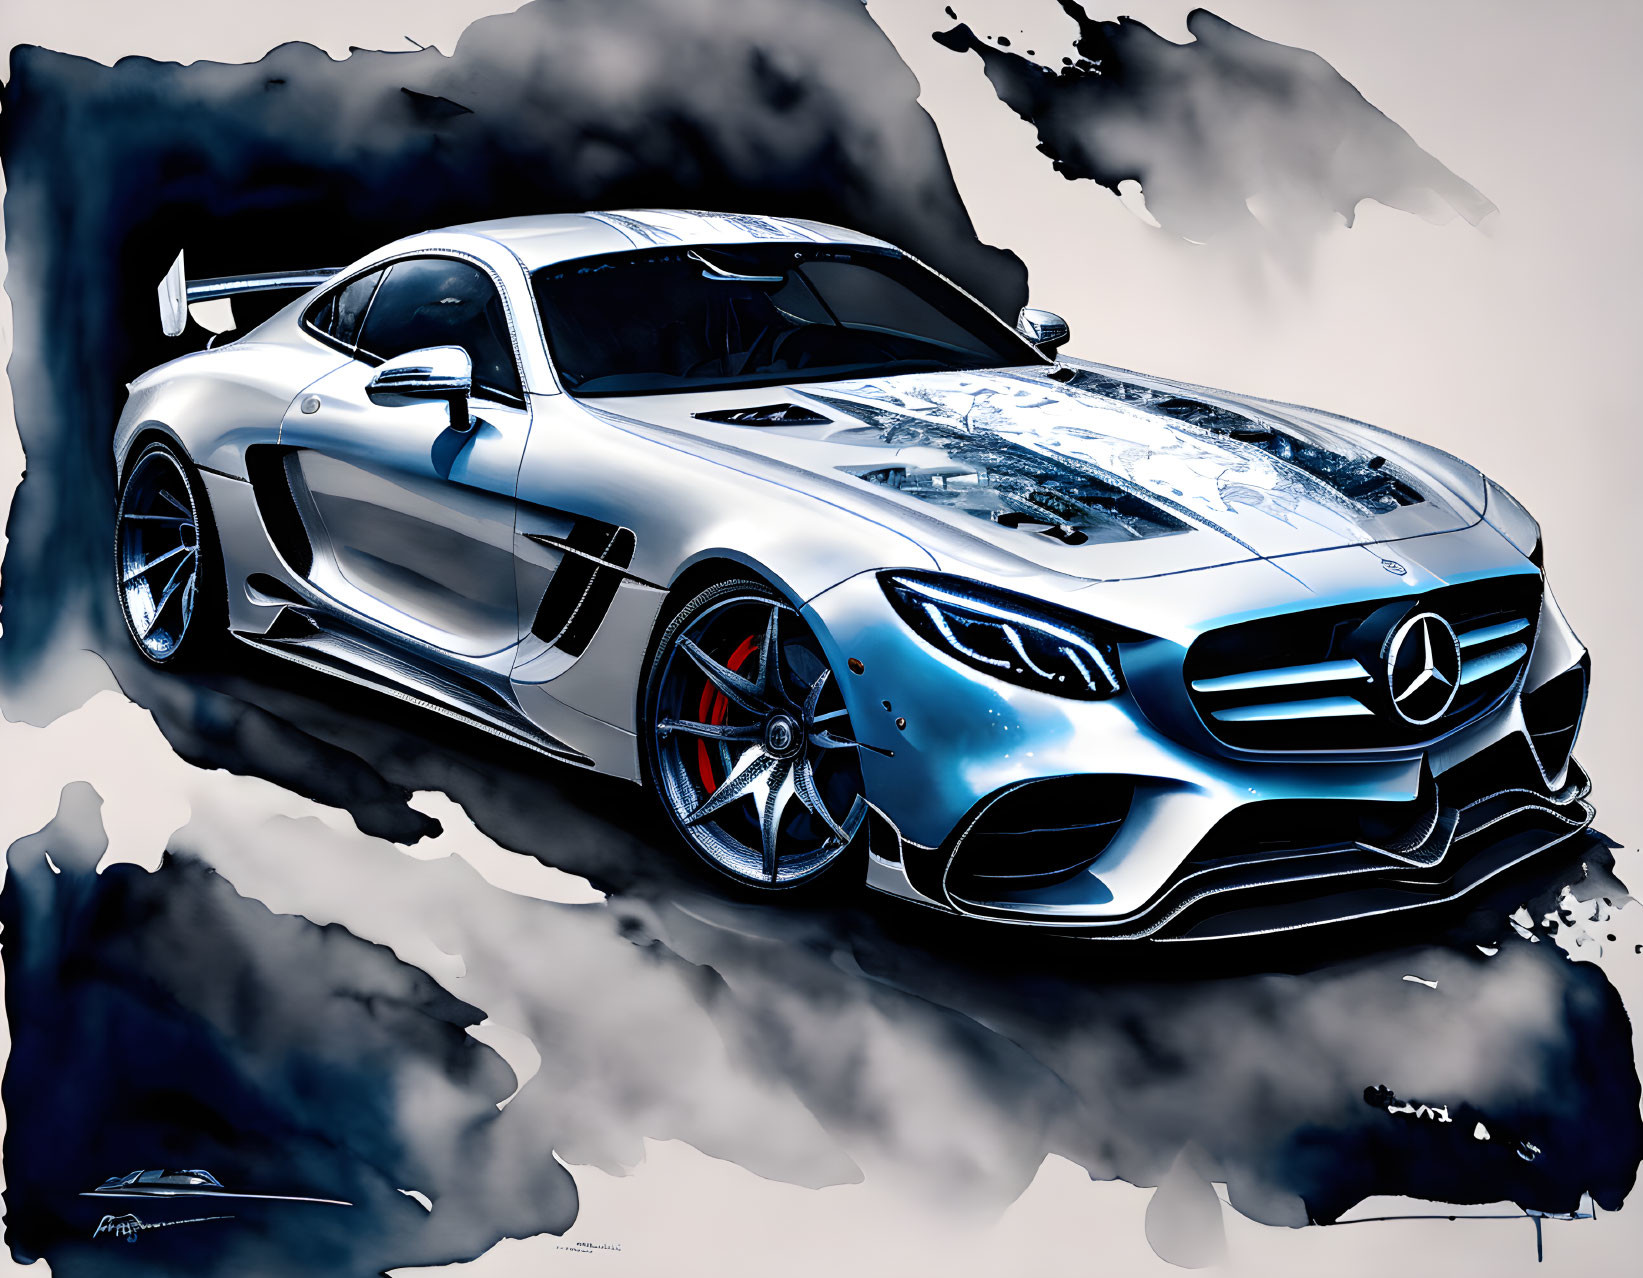 Silver Mercedes Benz Sports Car with Dynamic Lines on Abstract Dark Background